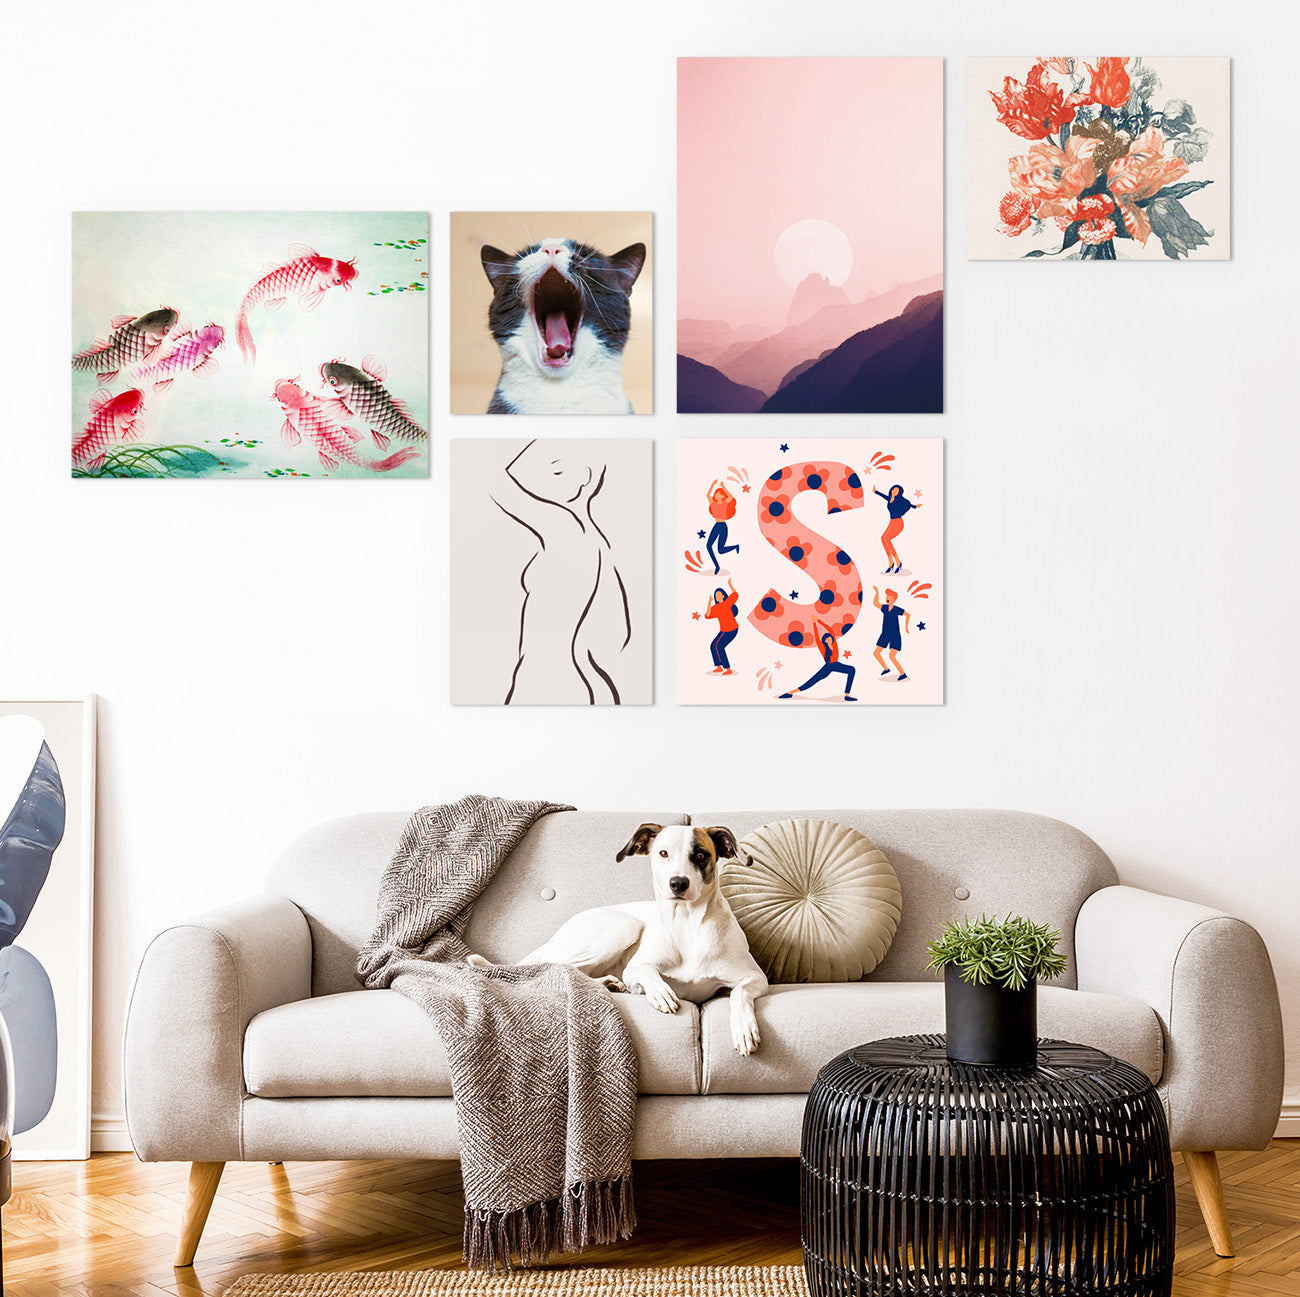 A dog-on-sofa with a gallery wall of creative artwork on metal poster display prints